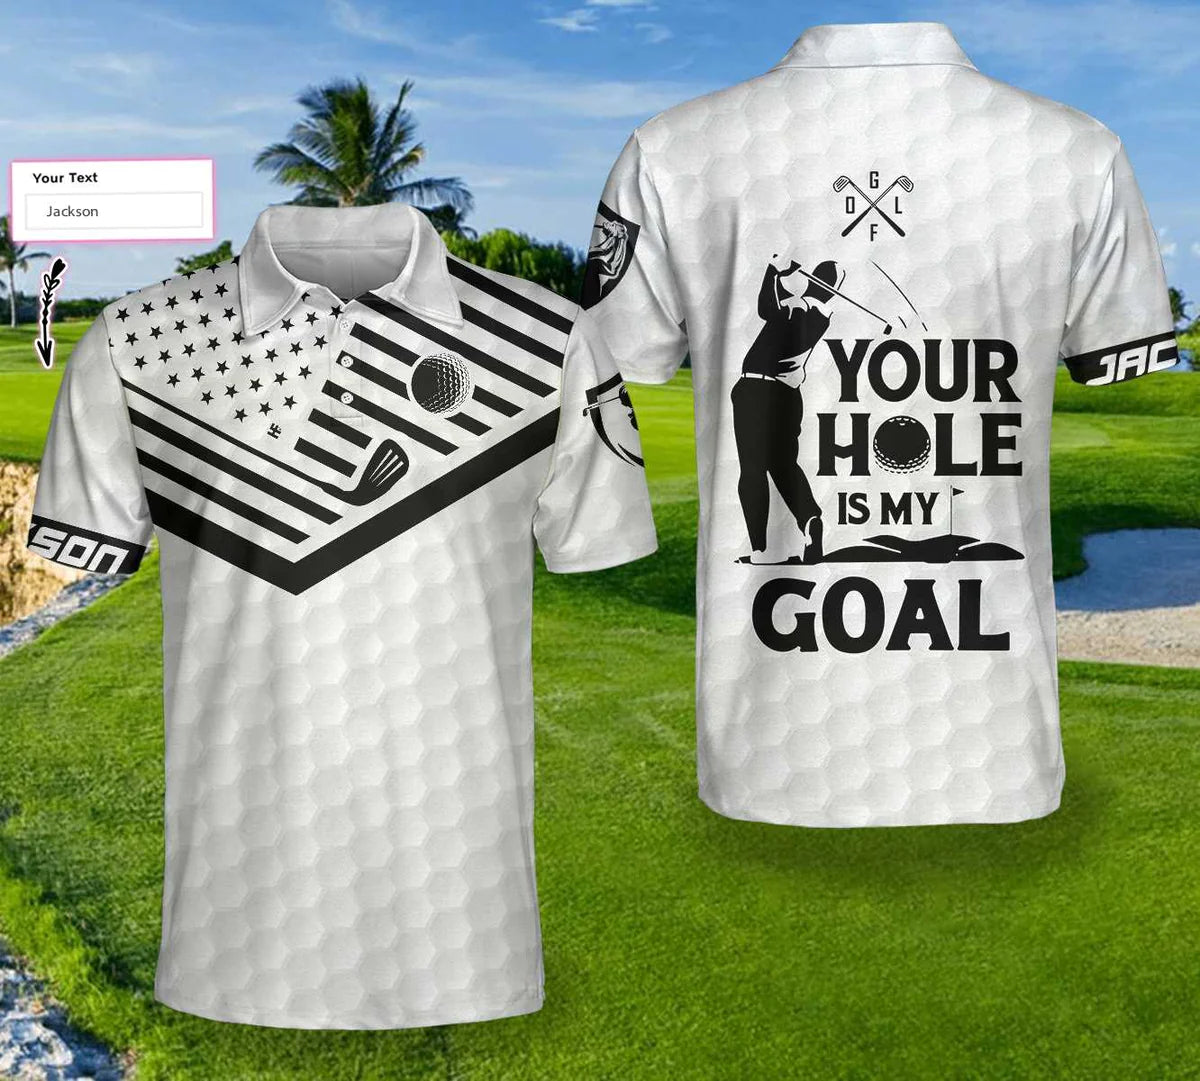 customized white american flag polo shirt perfect golf shirt for men with your hole is my goal design gp433 6pabu